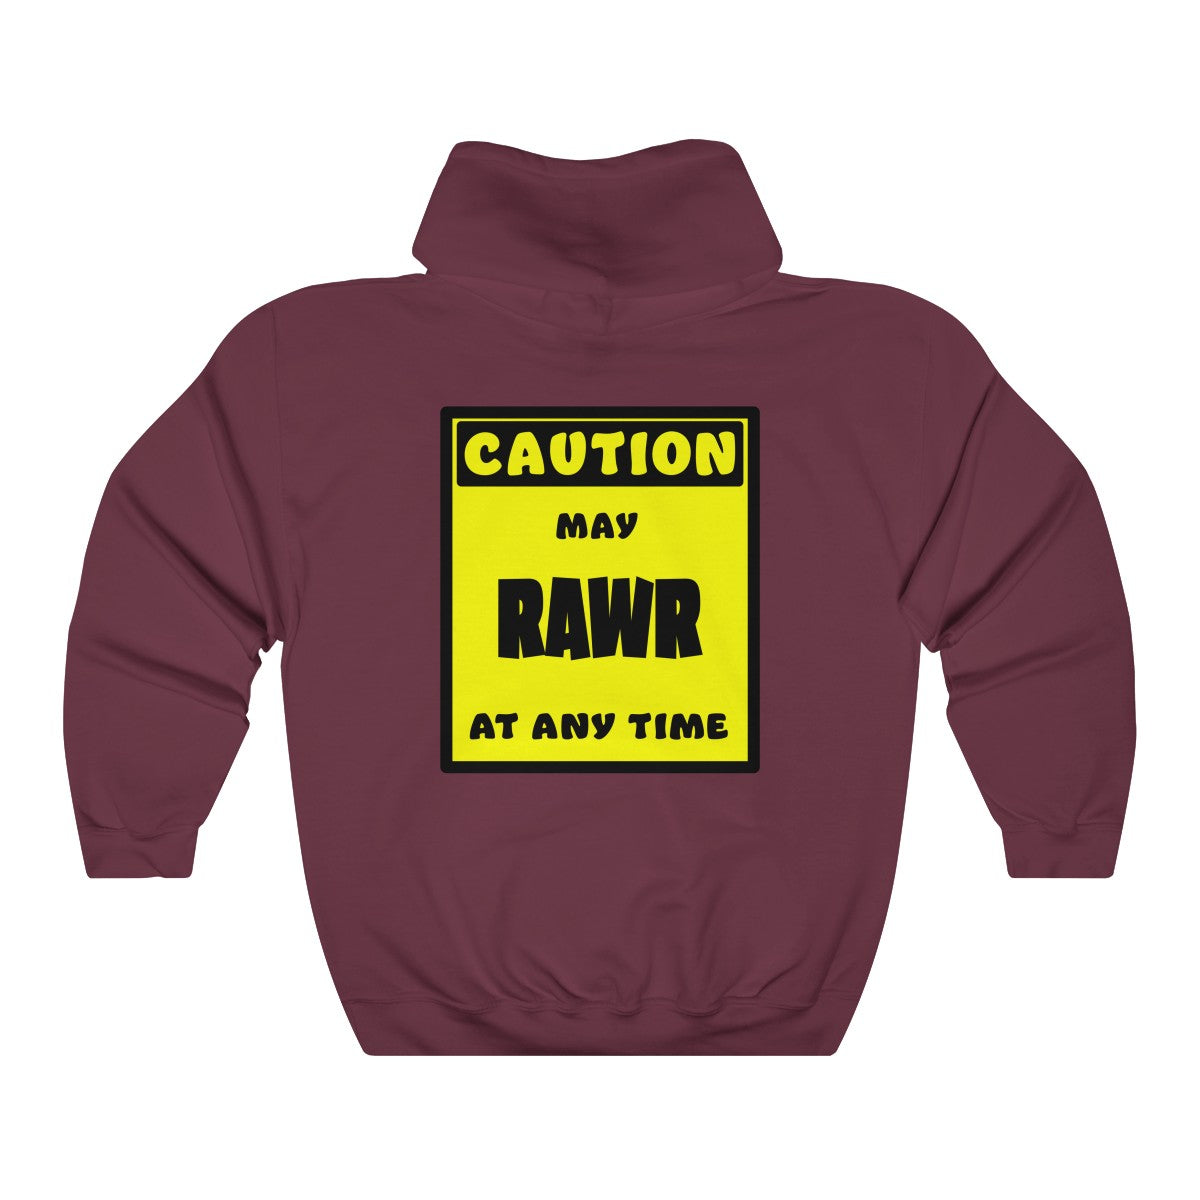 CAUTION! May RAWR at any time! - Hoodie Hoodie AFLT-Whootorca Maroon S 